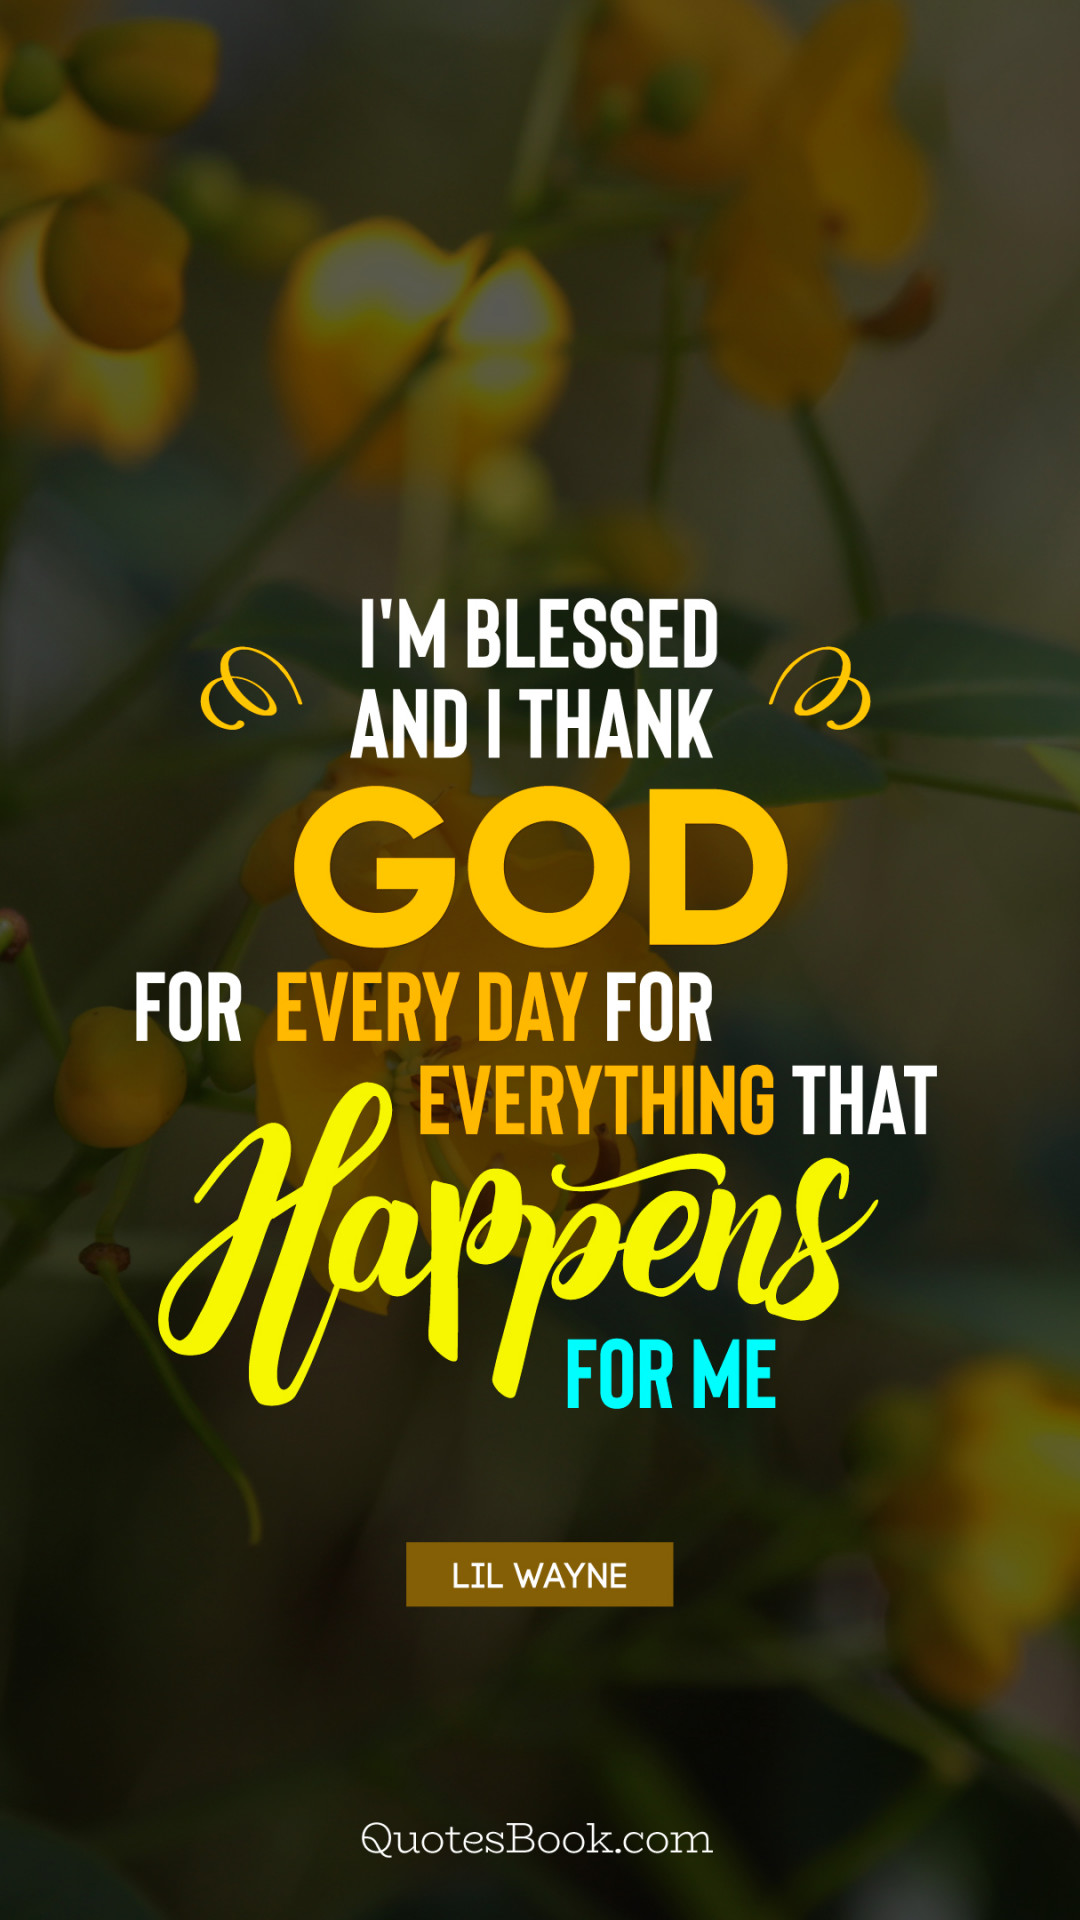 I'm blessed and I thank God for every day for everything that happens